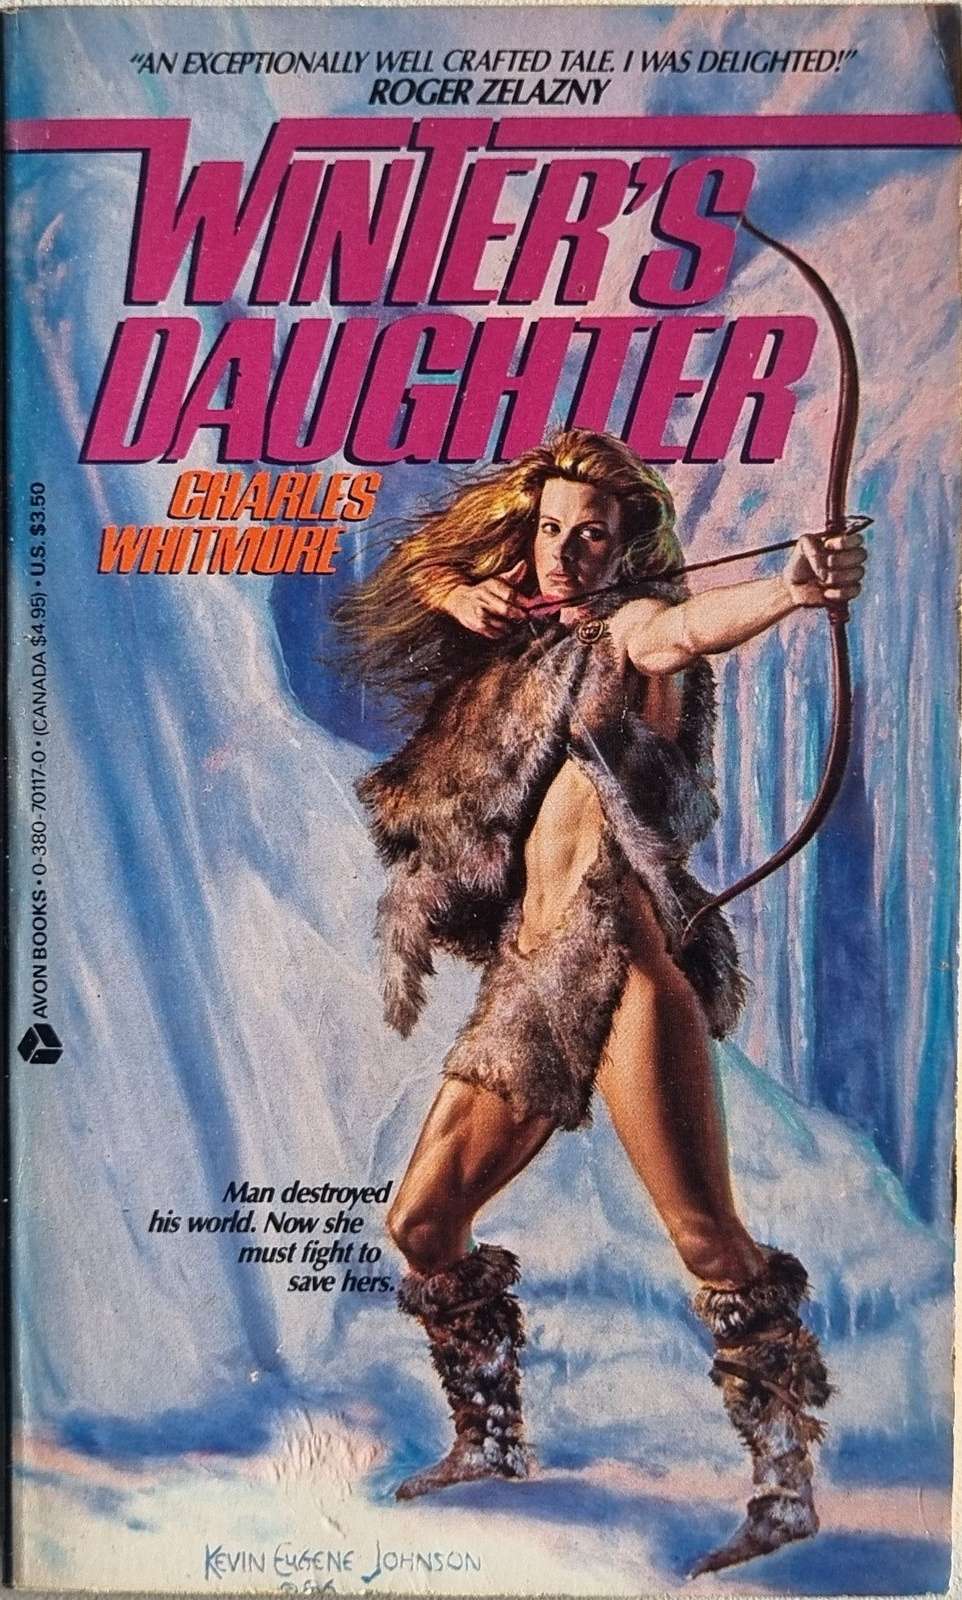 Winter's Daughter - Charles Whitmore Default Title